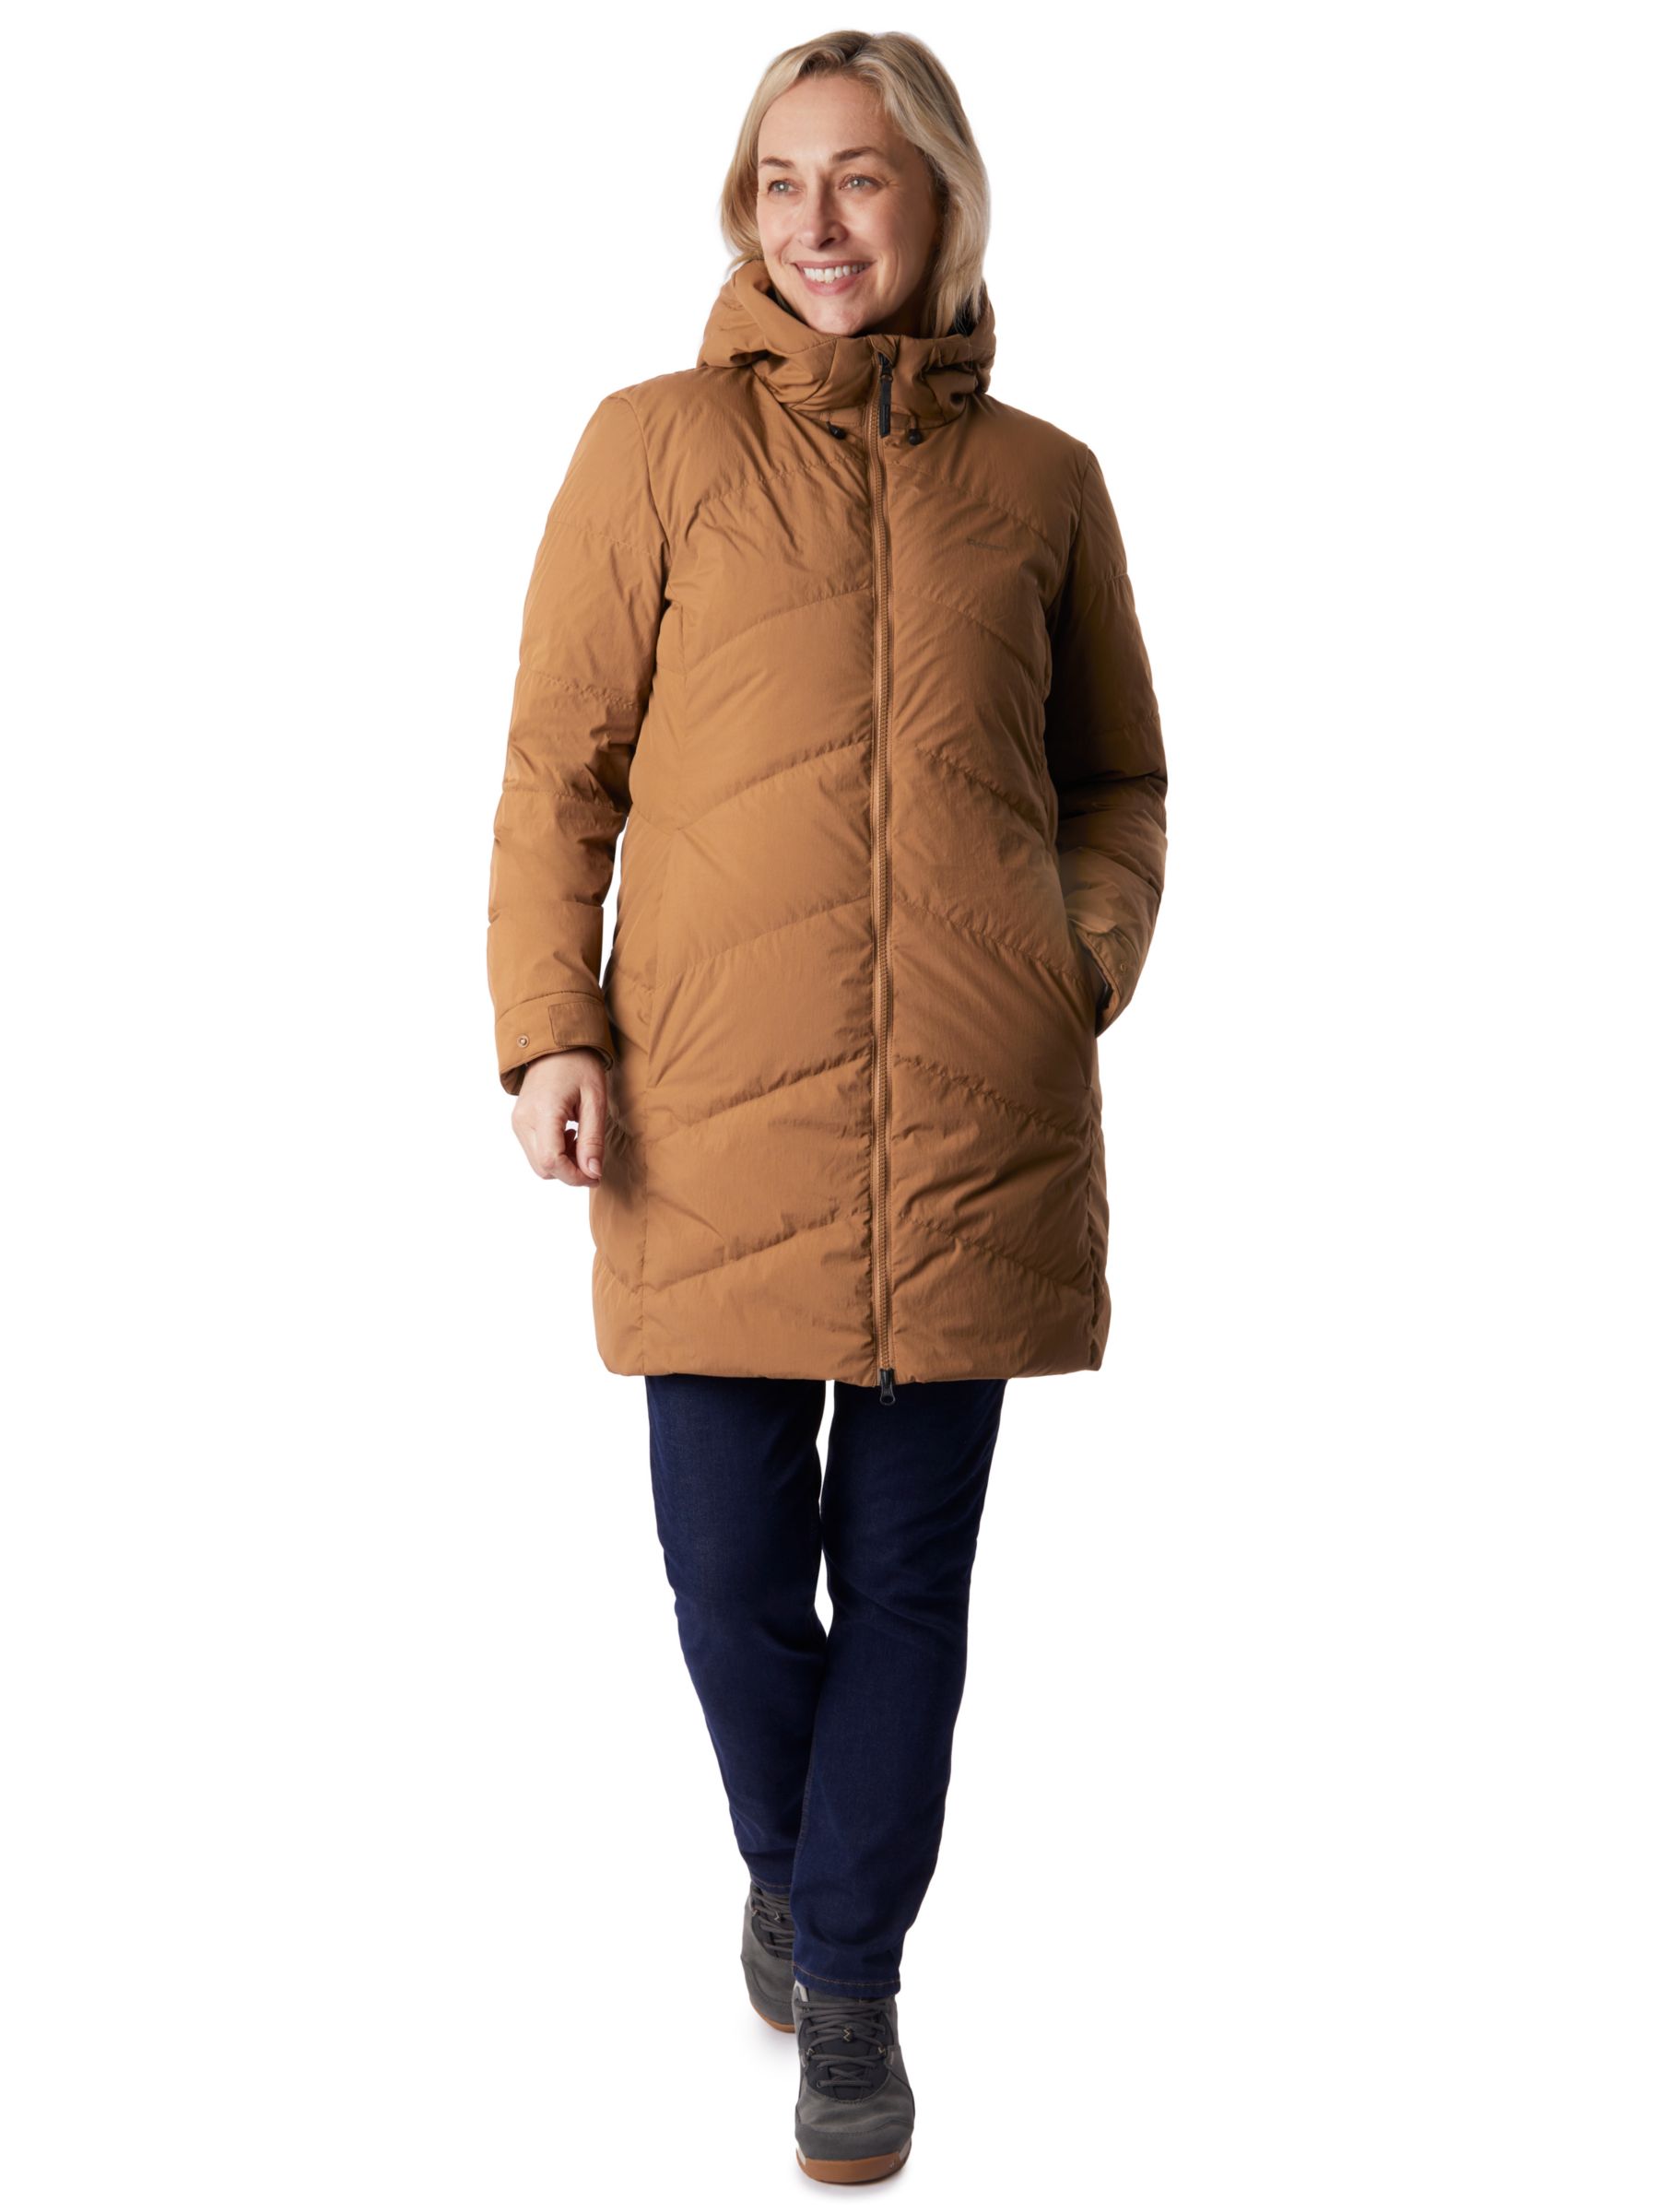 Rohan Delta Women's Down Insulated Coat at John Lewis & Partners